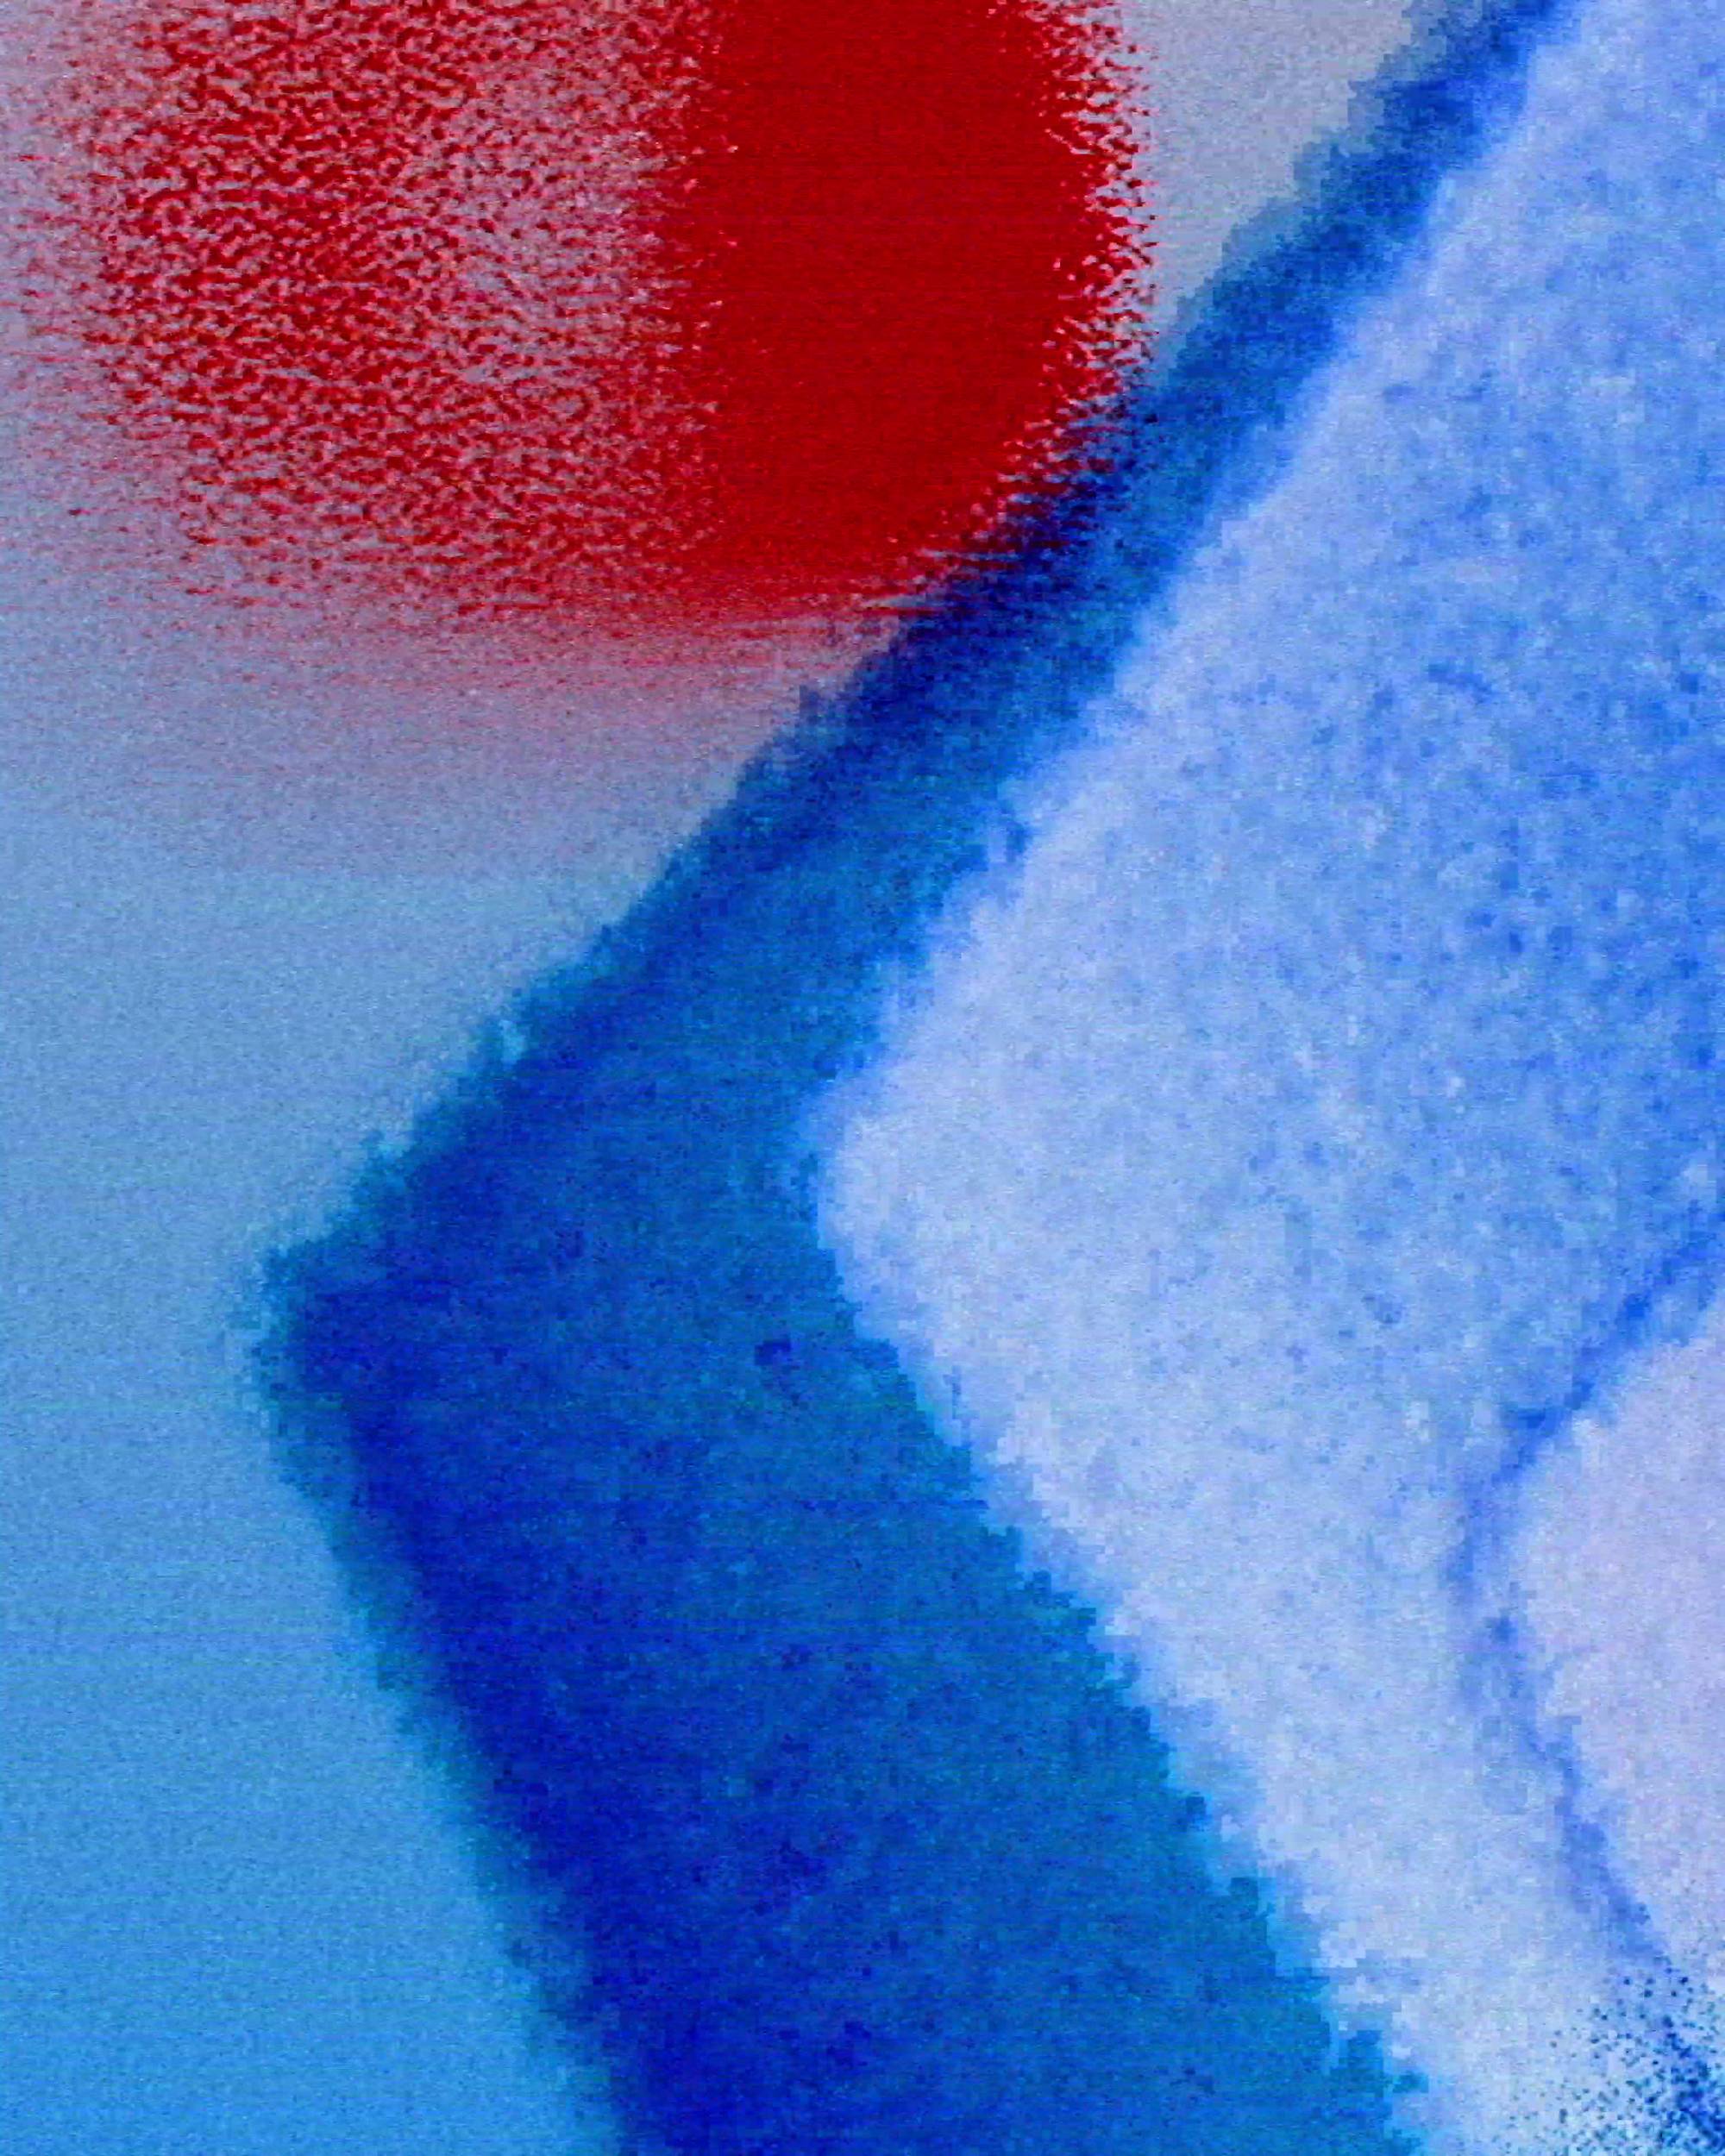 Blue, white and red animated abstract texture